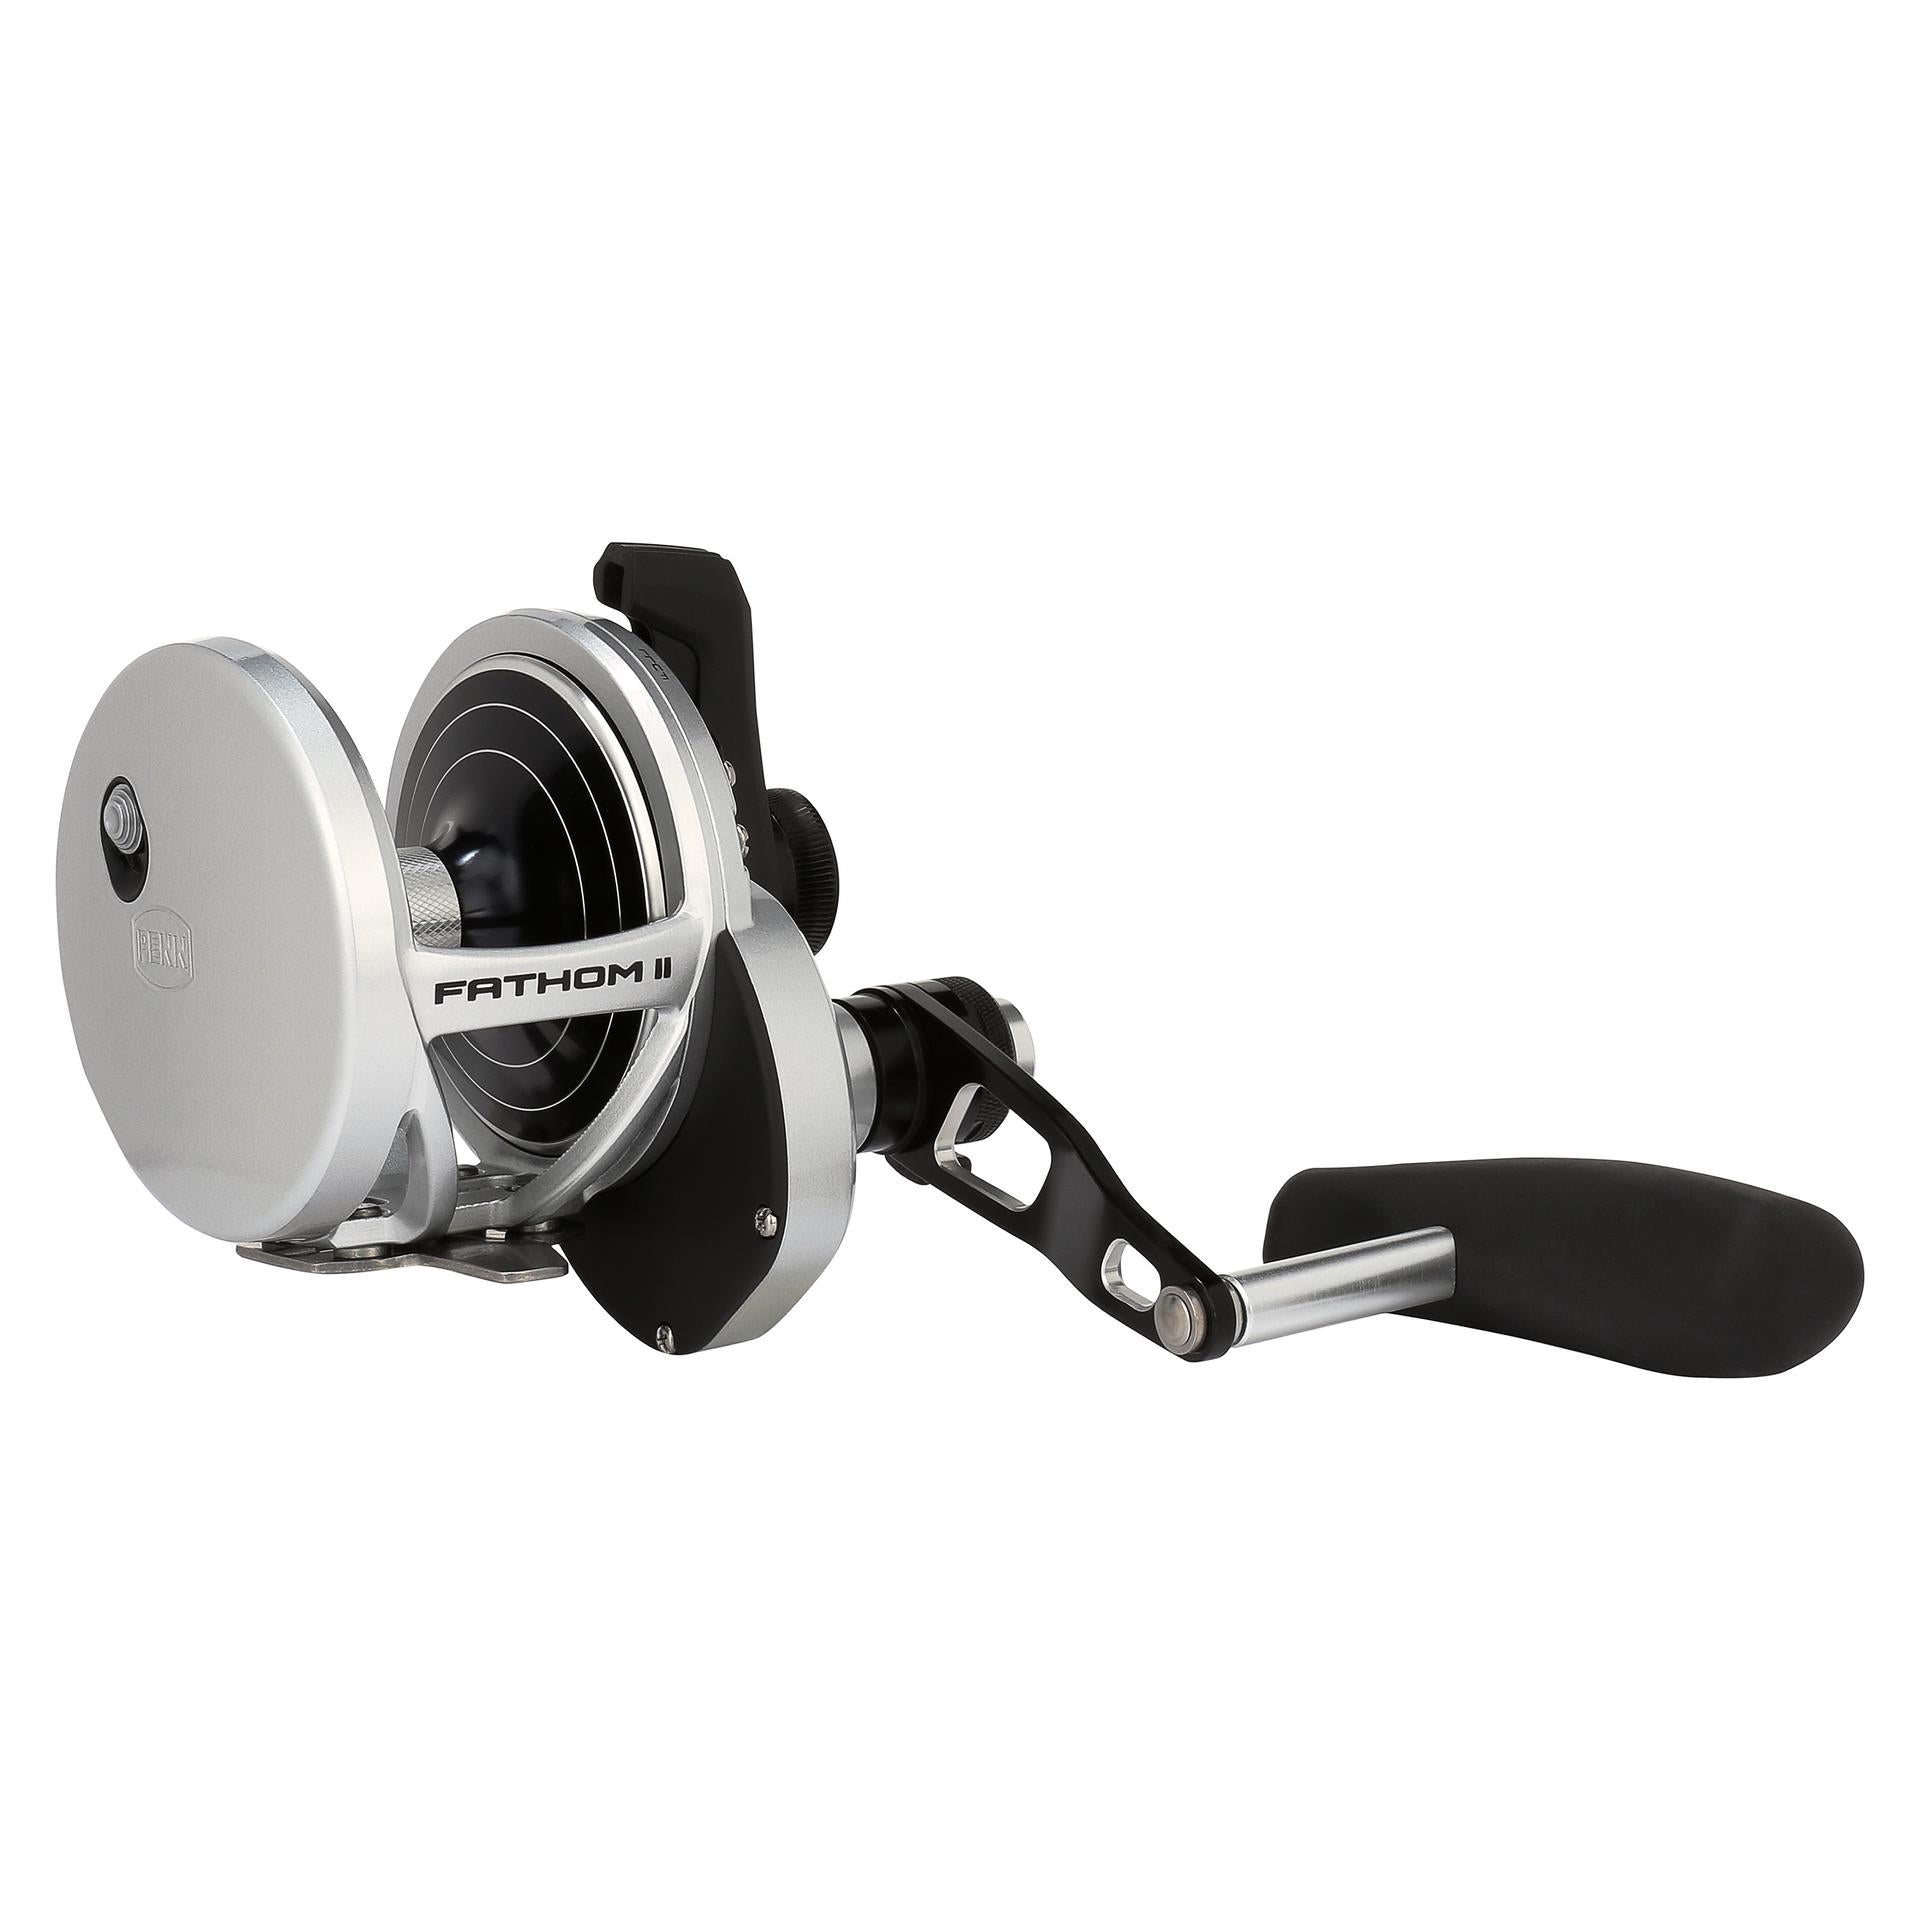 PENN Fishing - The ultimate surf casting reel has arrived. The new PENN  Fathom II Star Drag Casting Special is compact, powerful and easily  serviced with our fast gear access sideplate.